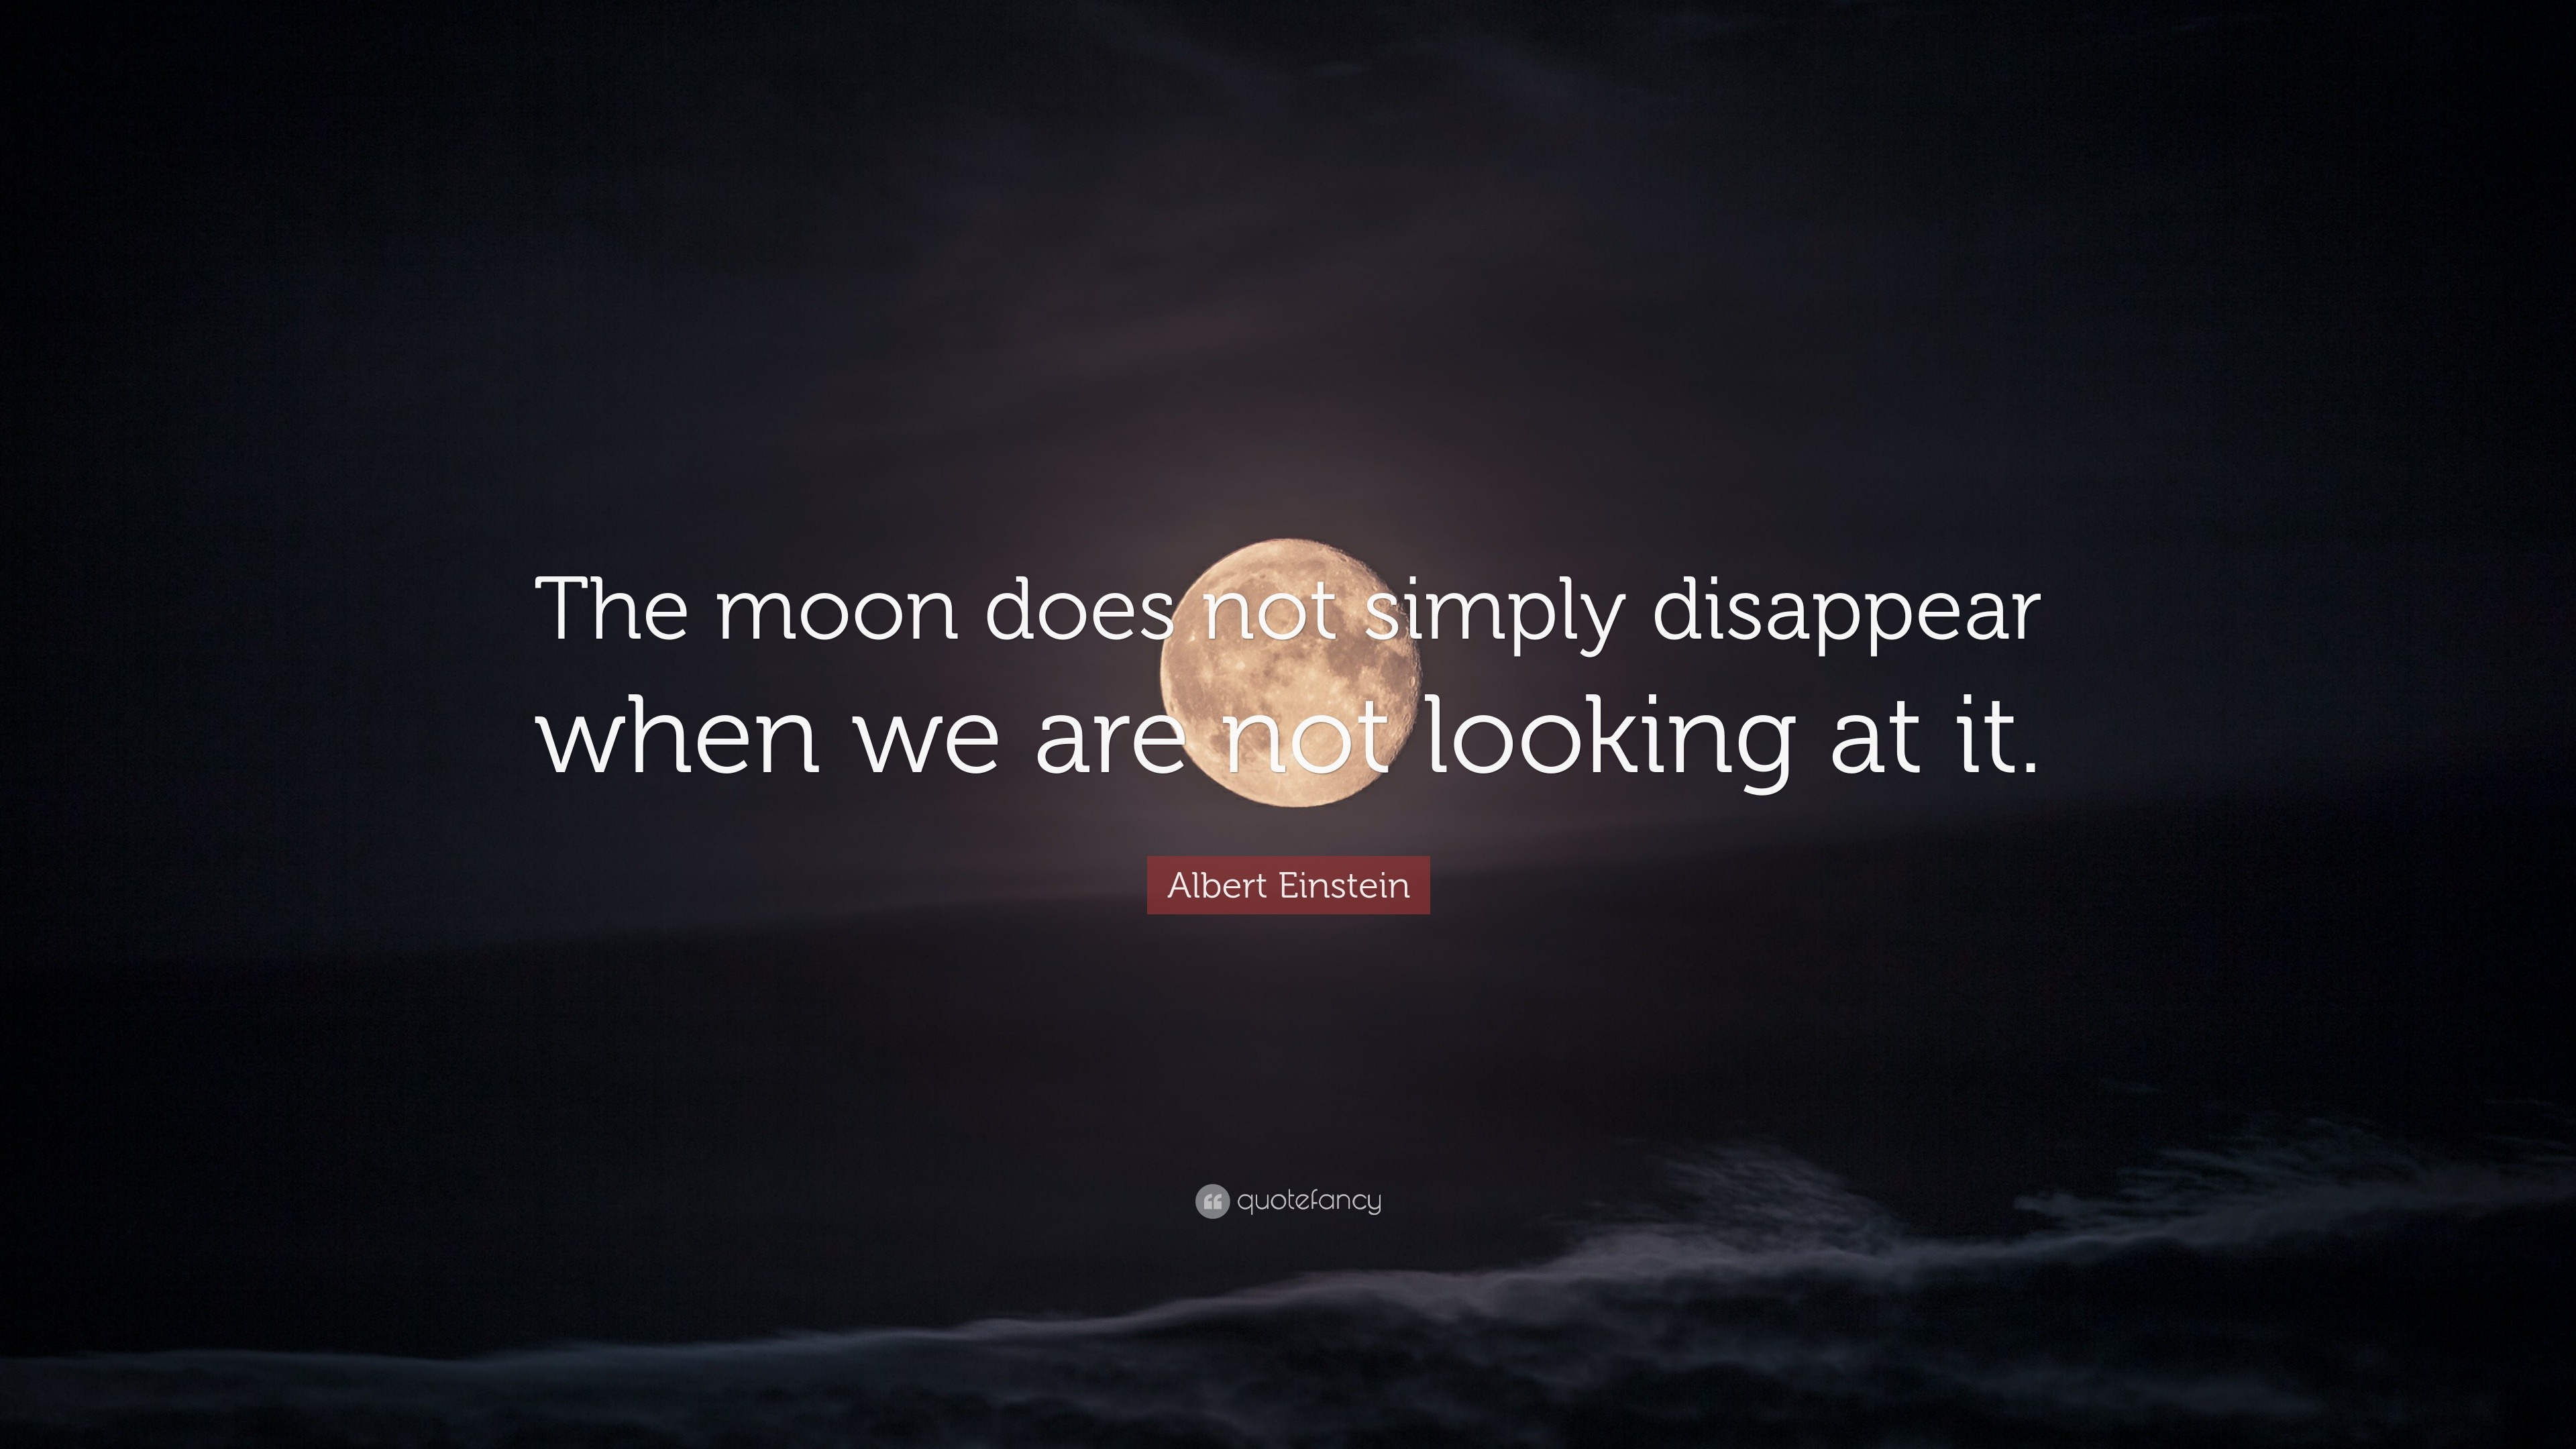 124111-Albert-Einstein-Quote-The-moon-does-not-simply-disappear-when-we.jpg